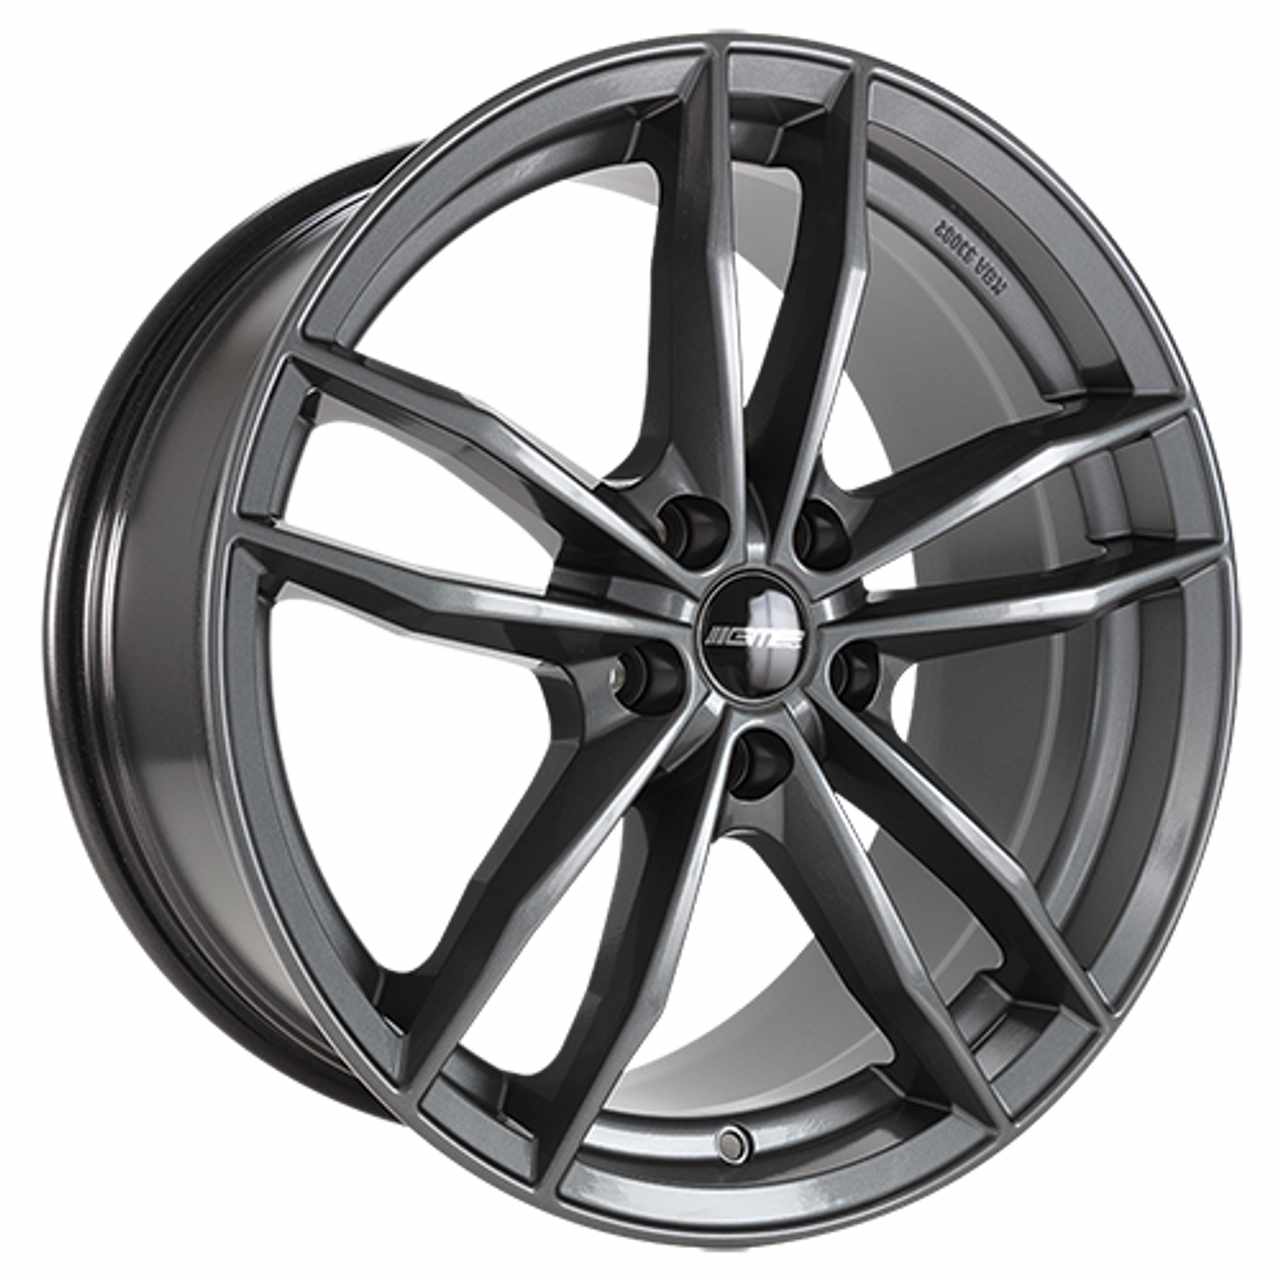 GMP SWAN anthracite glossy 8.0Jx18 5x112 ET45